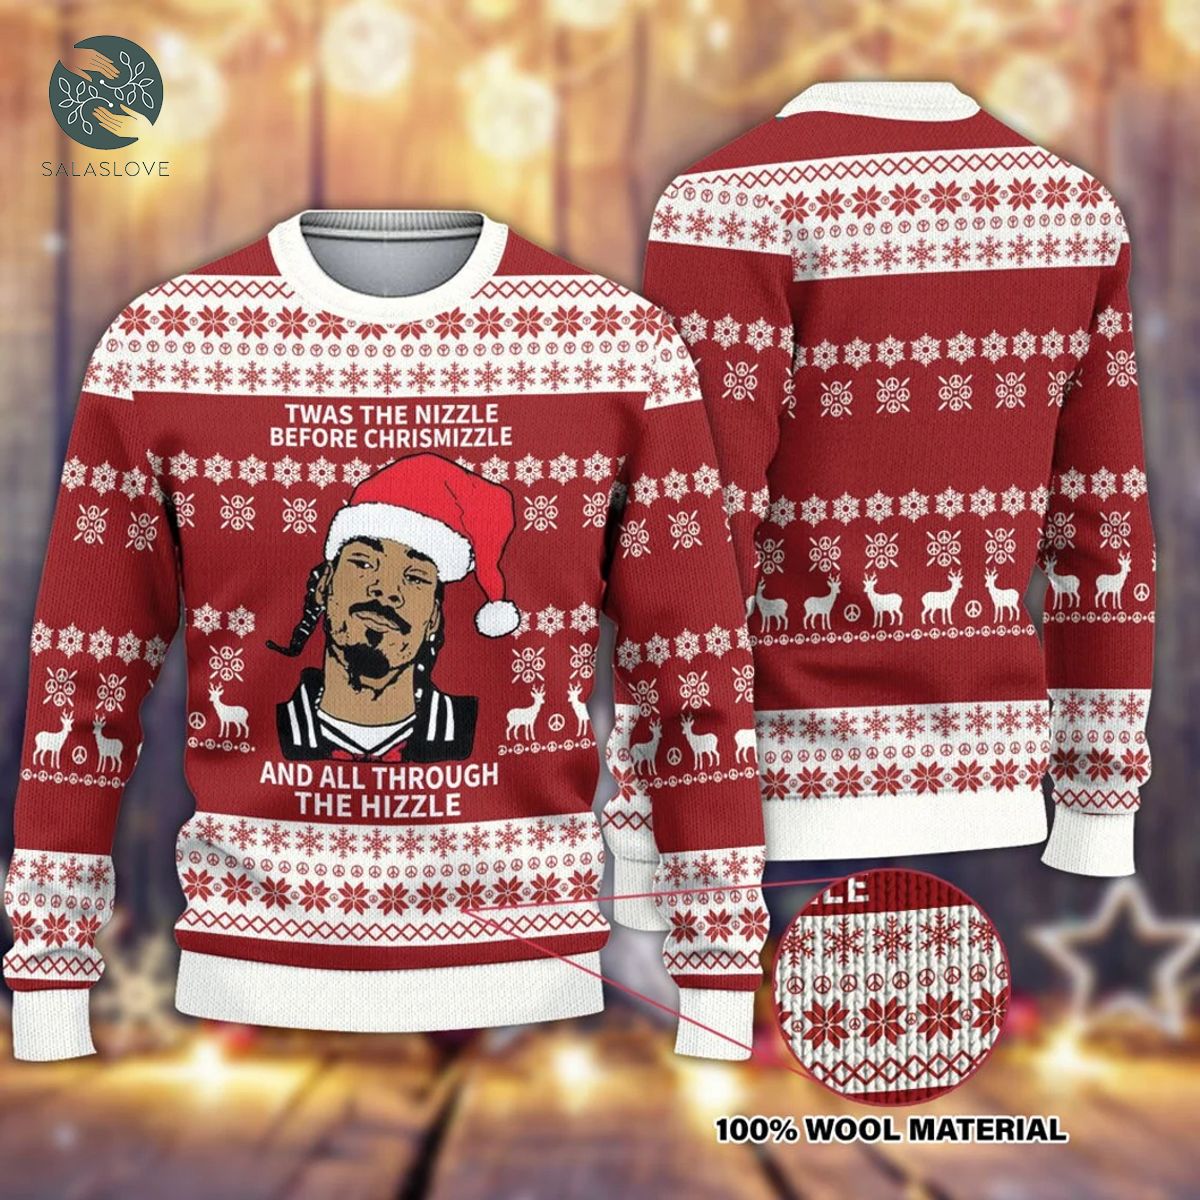 Snoop Dogg Twas The Nizzle Before Christmizzle  Sweater